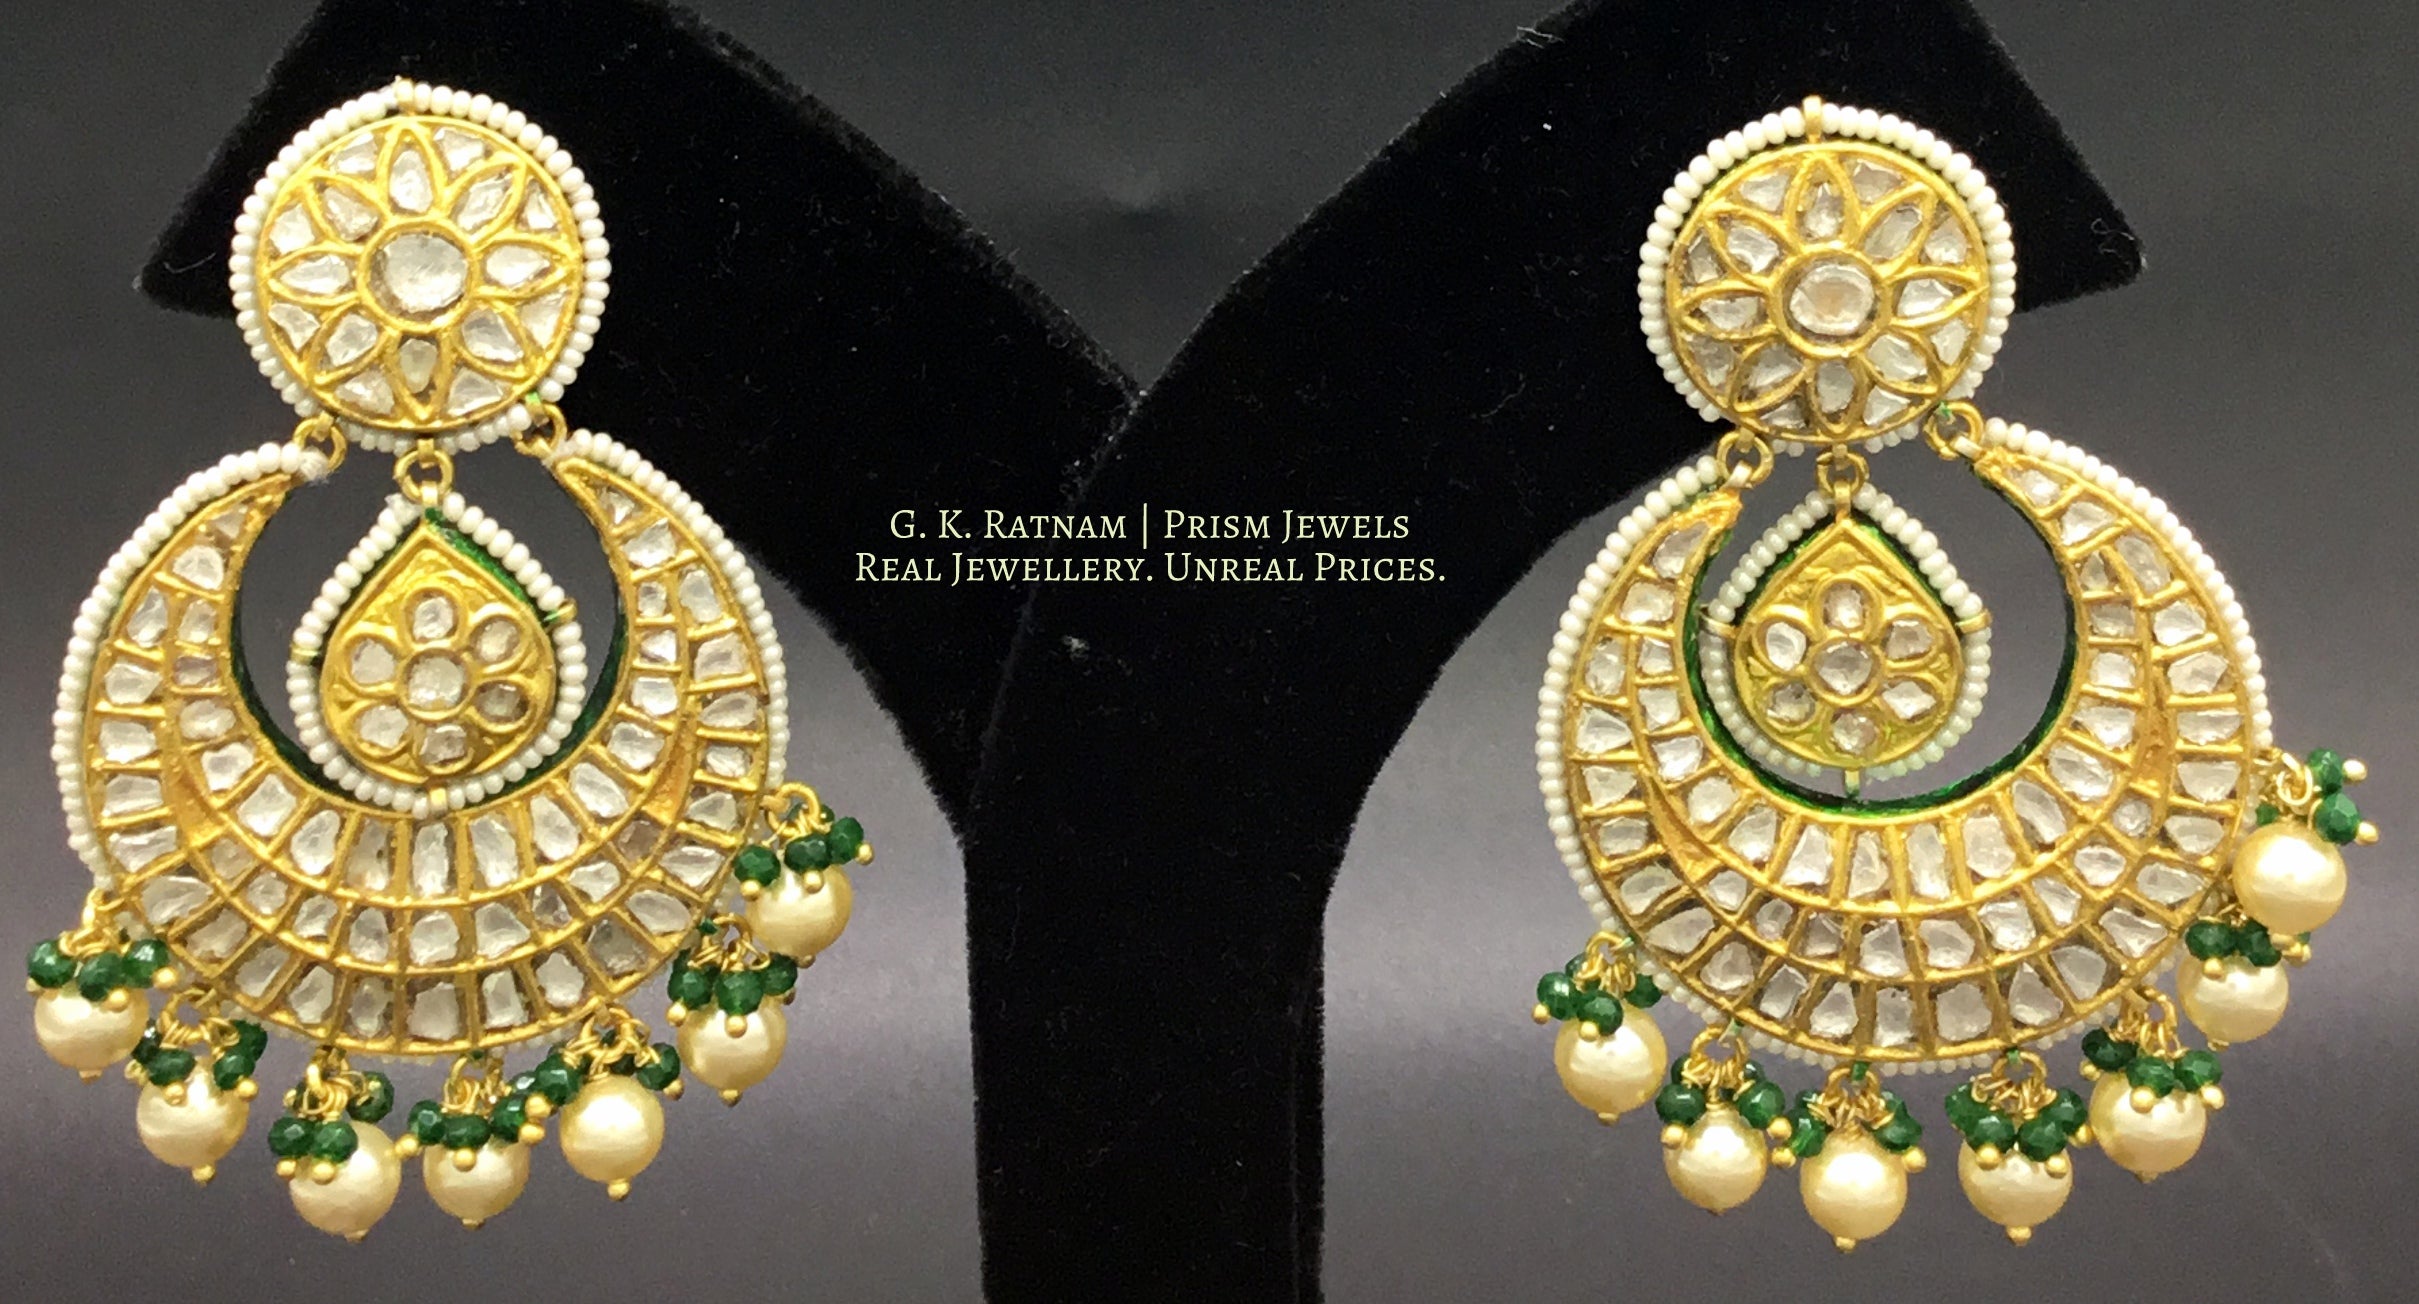 23k Gold and Diamond Polki Chand Bali Earring Pair with pearls and green beads - G. K. Ratnam